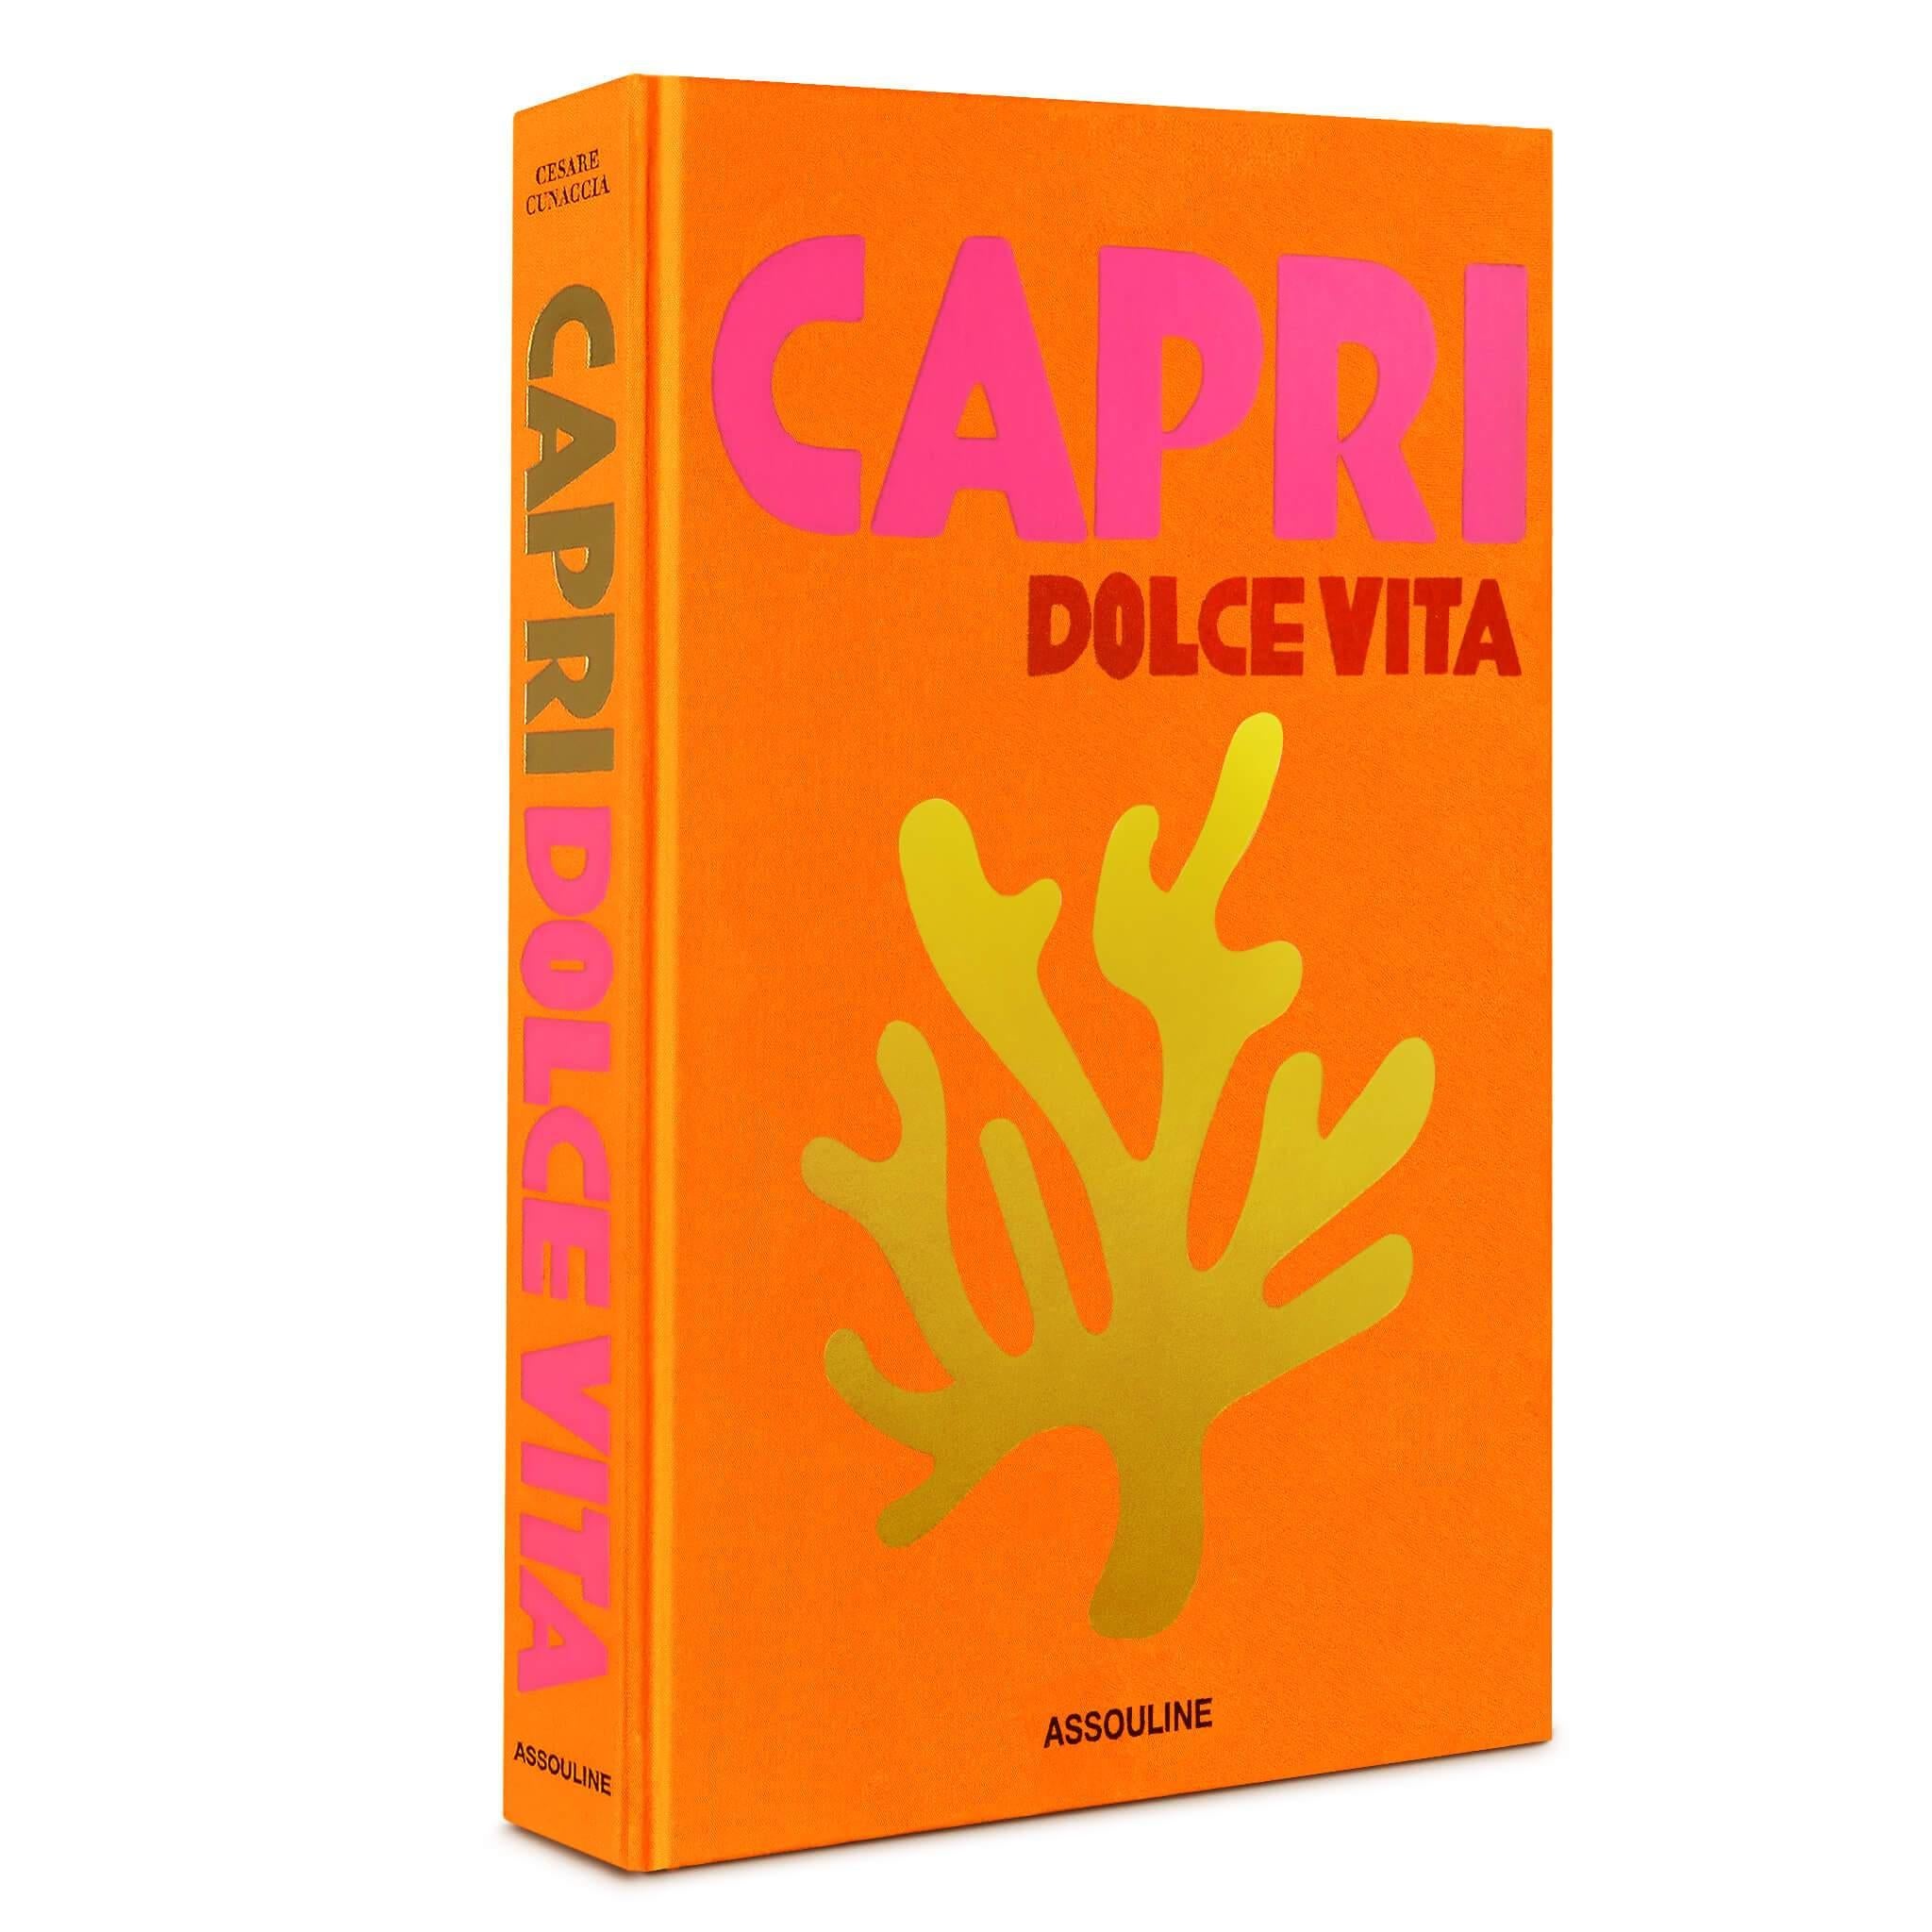 Capri Dolce VITA (Hardcover) by Cesare Cunaccia
In Stock in Los Angeles

Capri, a resort island dating back to the height of the Roman Empire, has long been an extraordinary destination full of ancient charm. Cherished by everyone from physician